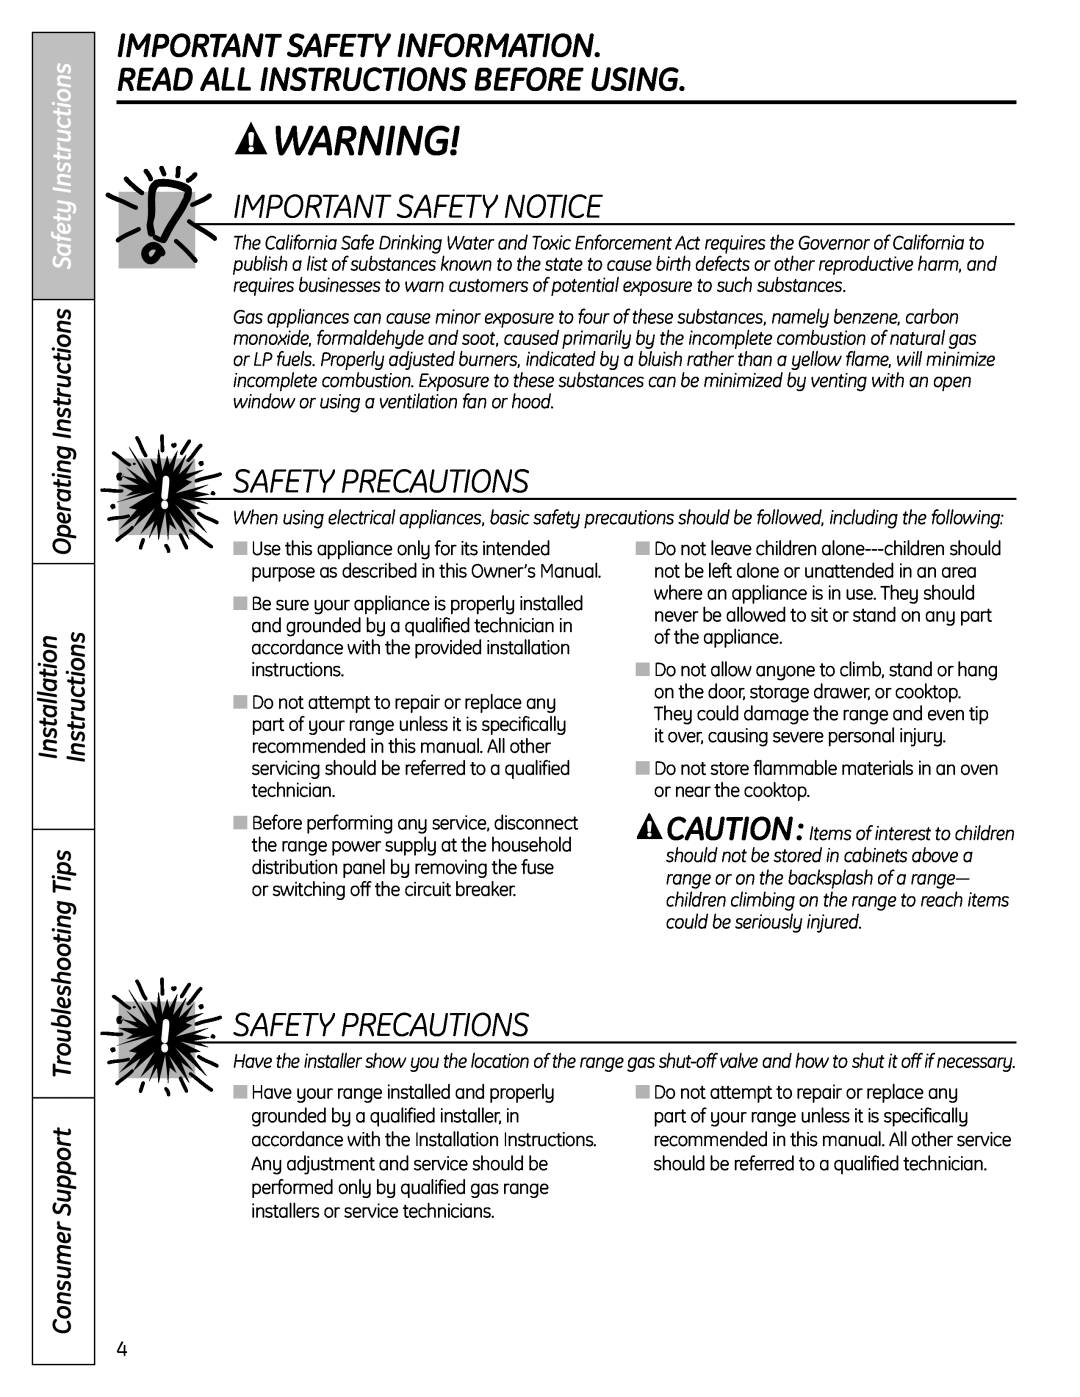 GE C2S980 Important Safety Information, Read All Instructions Before Using, Important Safety Notice, Safety Precautions 